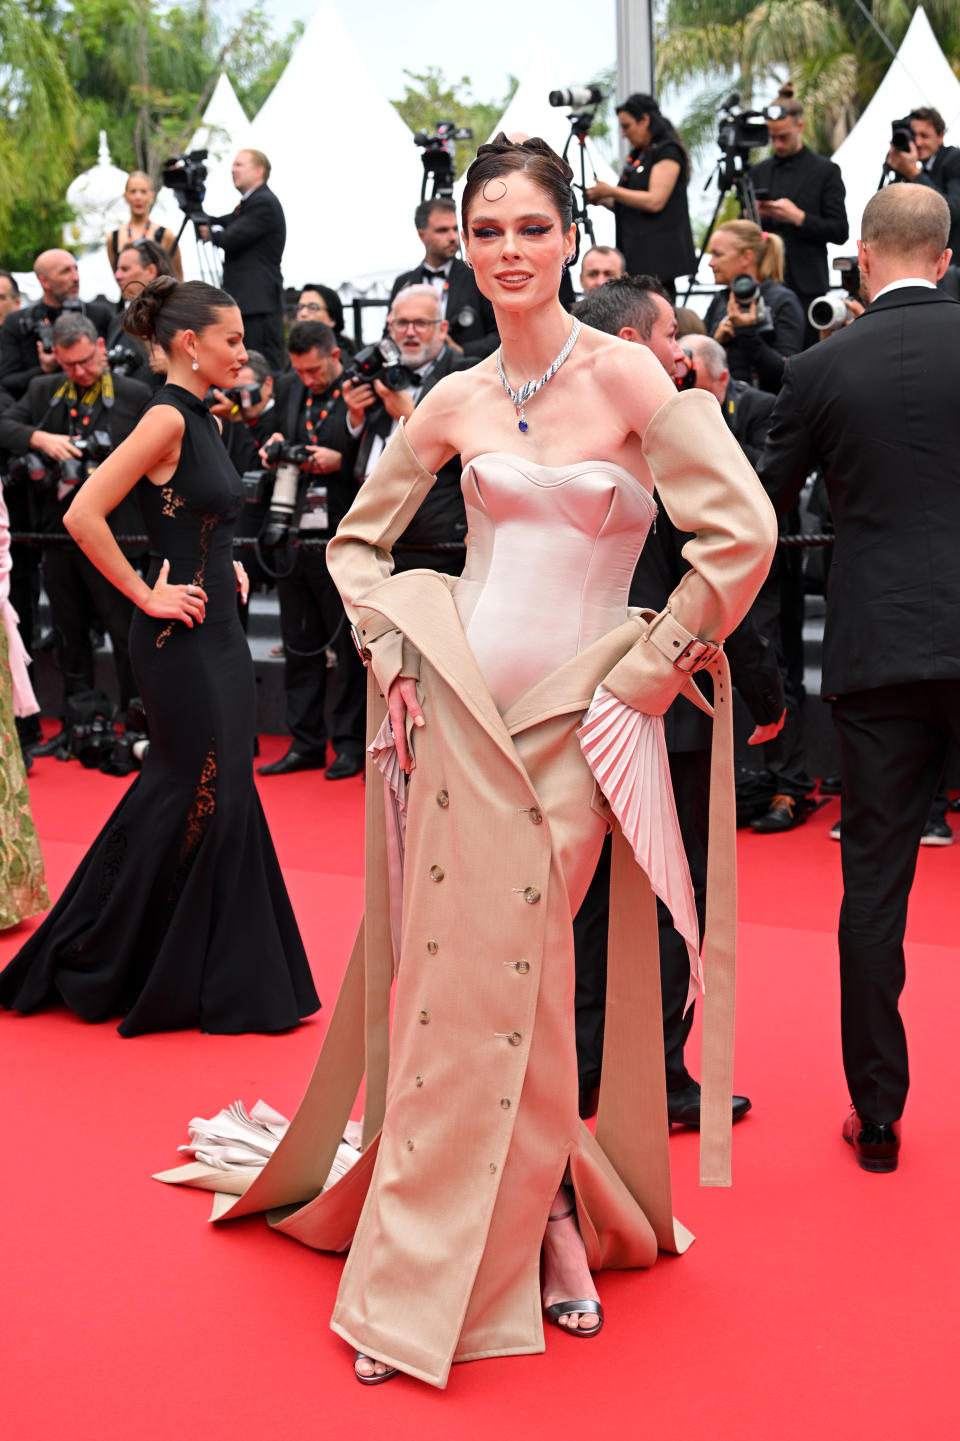 Rocha attends the "The Apprentice" Red Carpet at the 77th annual Cannes Film Festival at Palais des Festivals wearing strappy stilettos